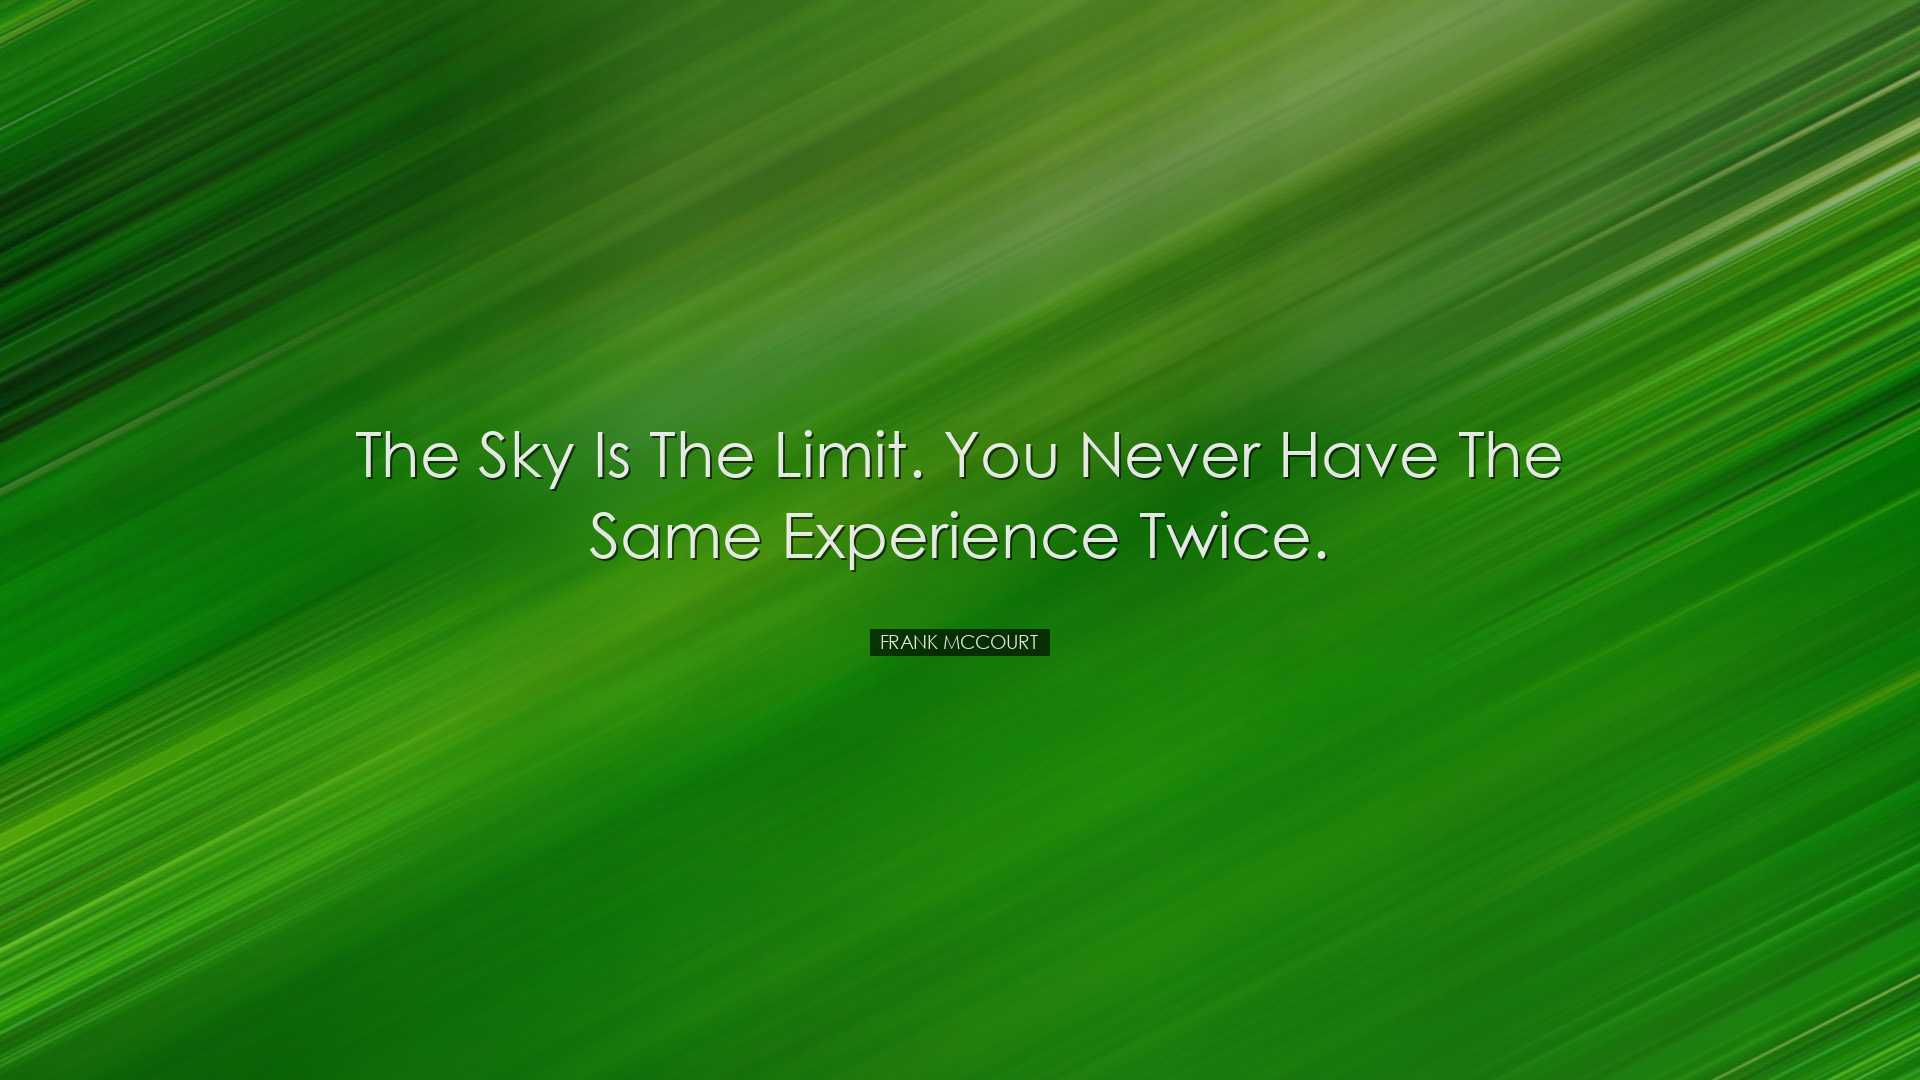 The sky is the limit. You never have the same experience twice. -